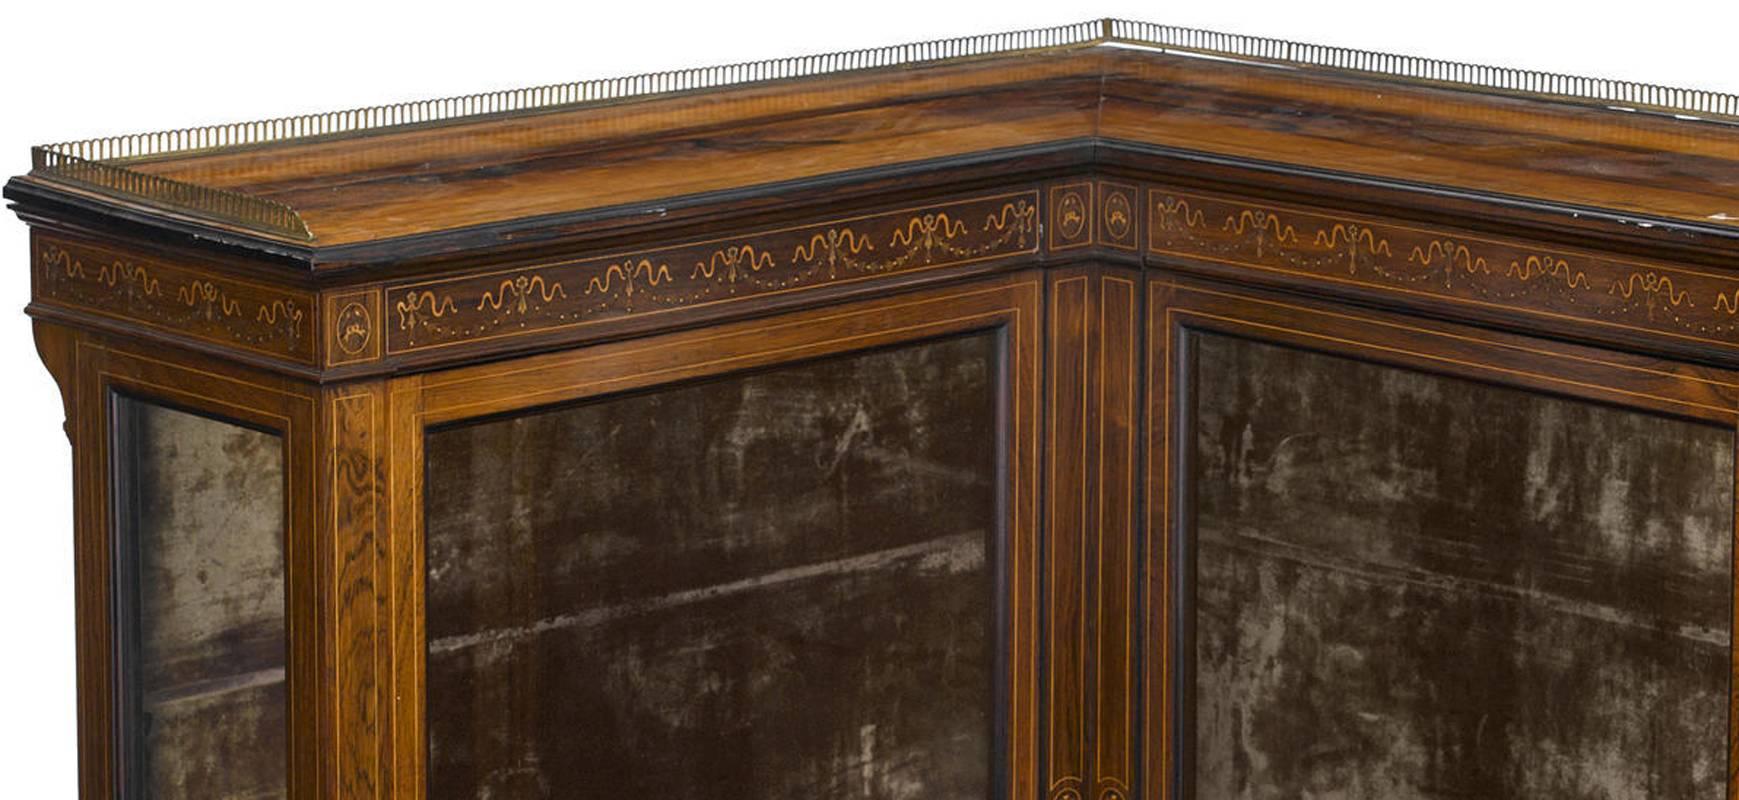 Very unusual and unique 19th century English finely inlaid rosewood corner display cabinet with velvet lining interior. Display cabinet has an open gallery on the top with detailed garland and ribbon motif inlaid above two glass swinging doors, all